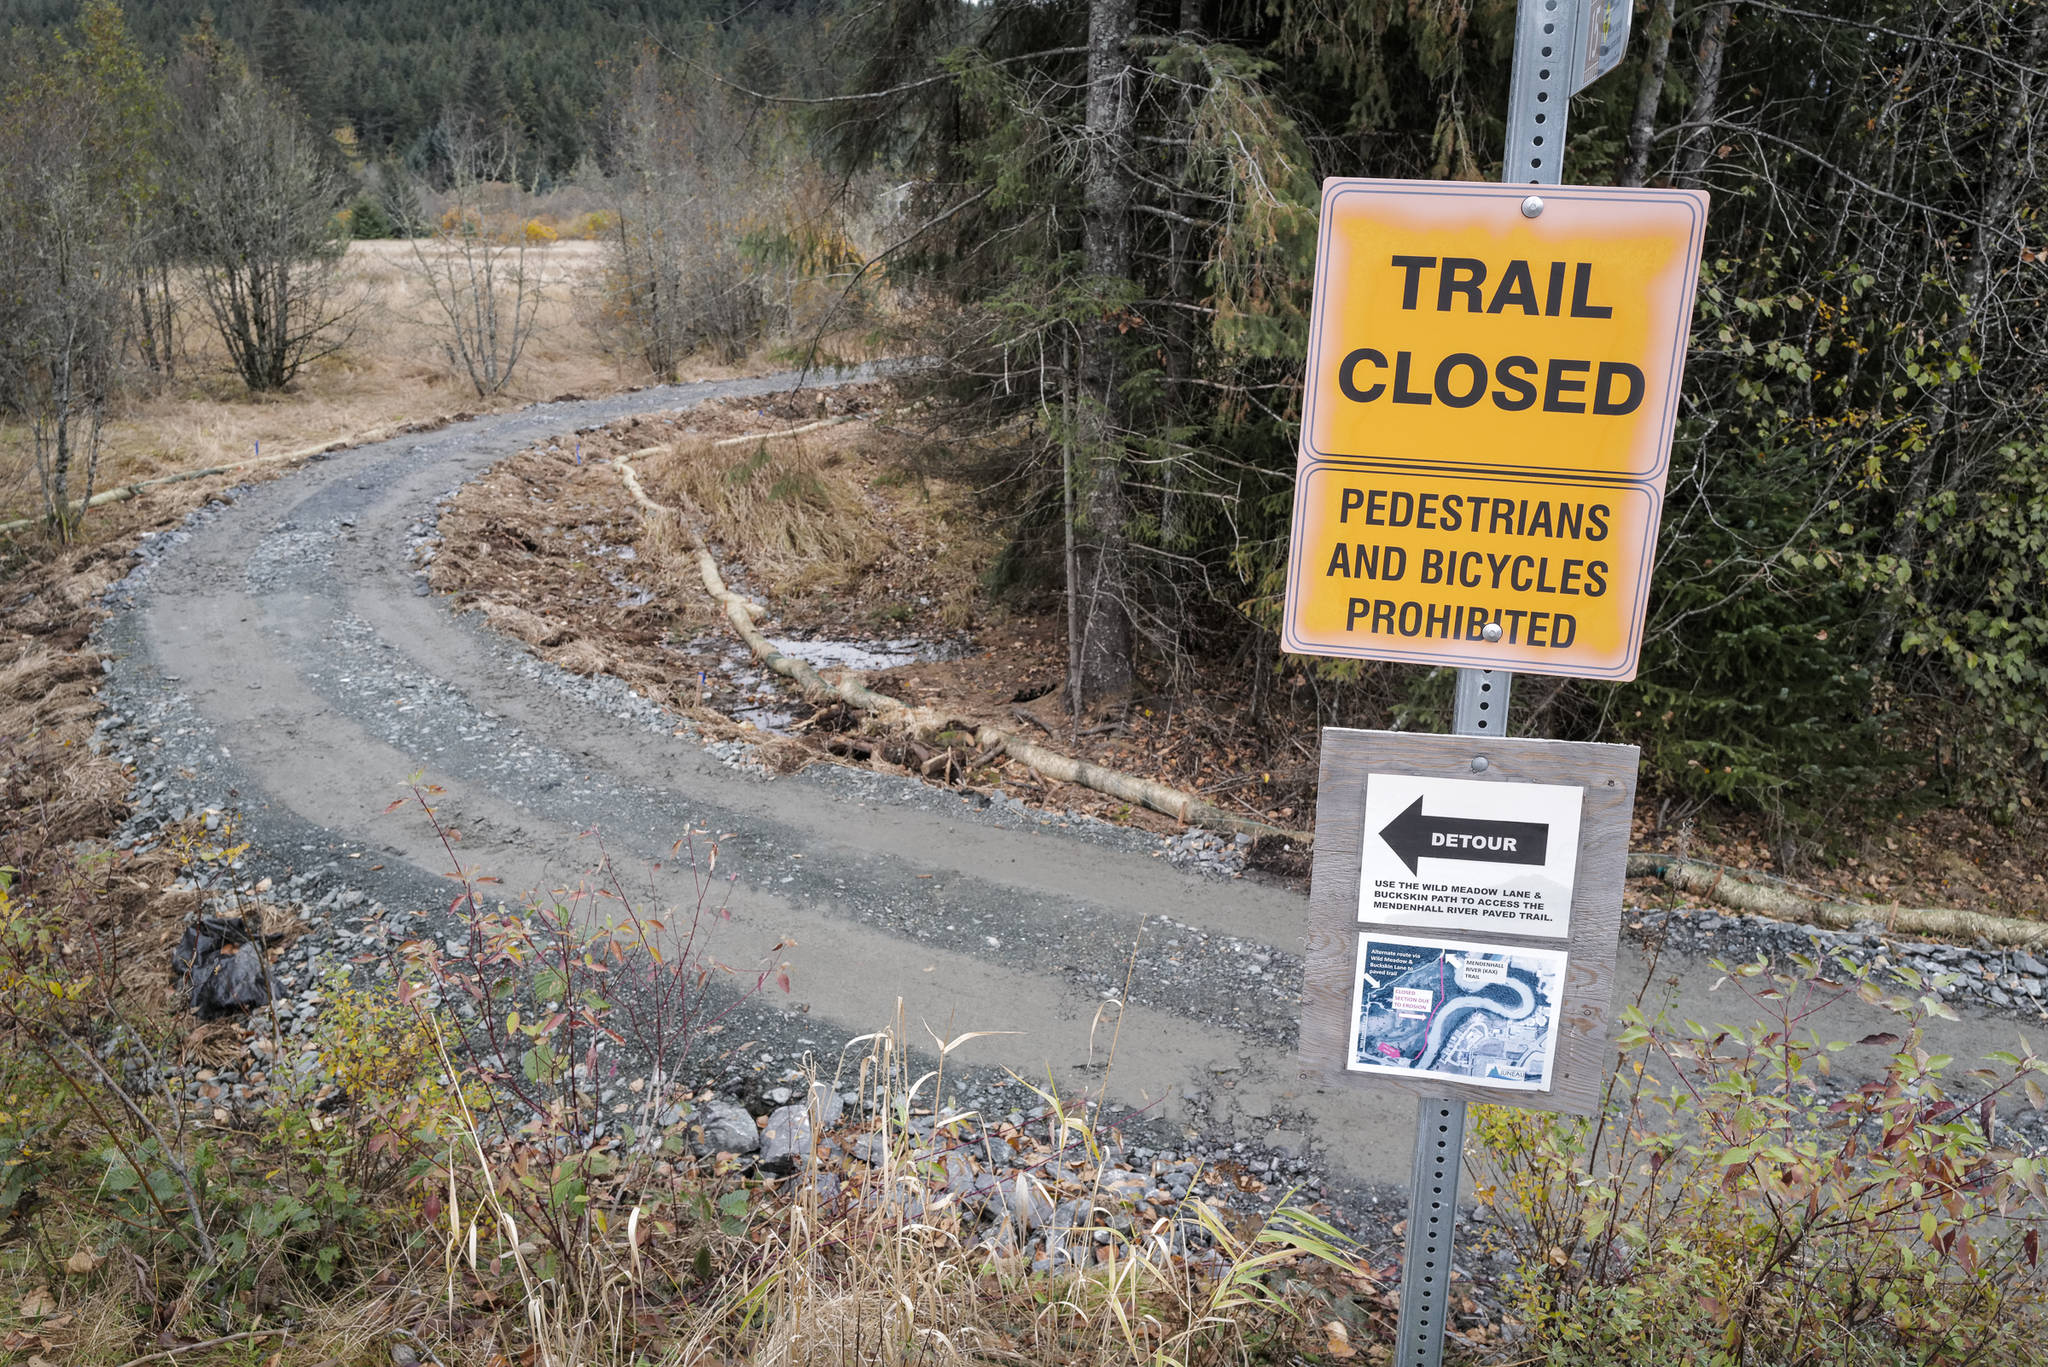 Work on the reroute of Kaxdigoowu Héen Dei (Brotherhood Bridge Trail) is nearing completion on Monday, Oct. 14, 2019. Learn more about the project by watching the video below. (Michael Penn | Juneau Empire)